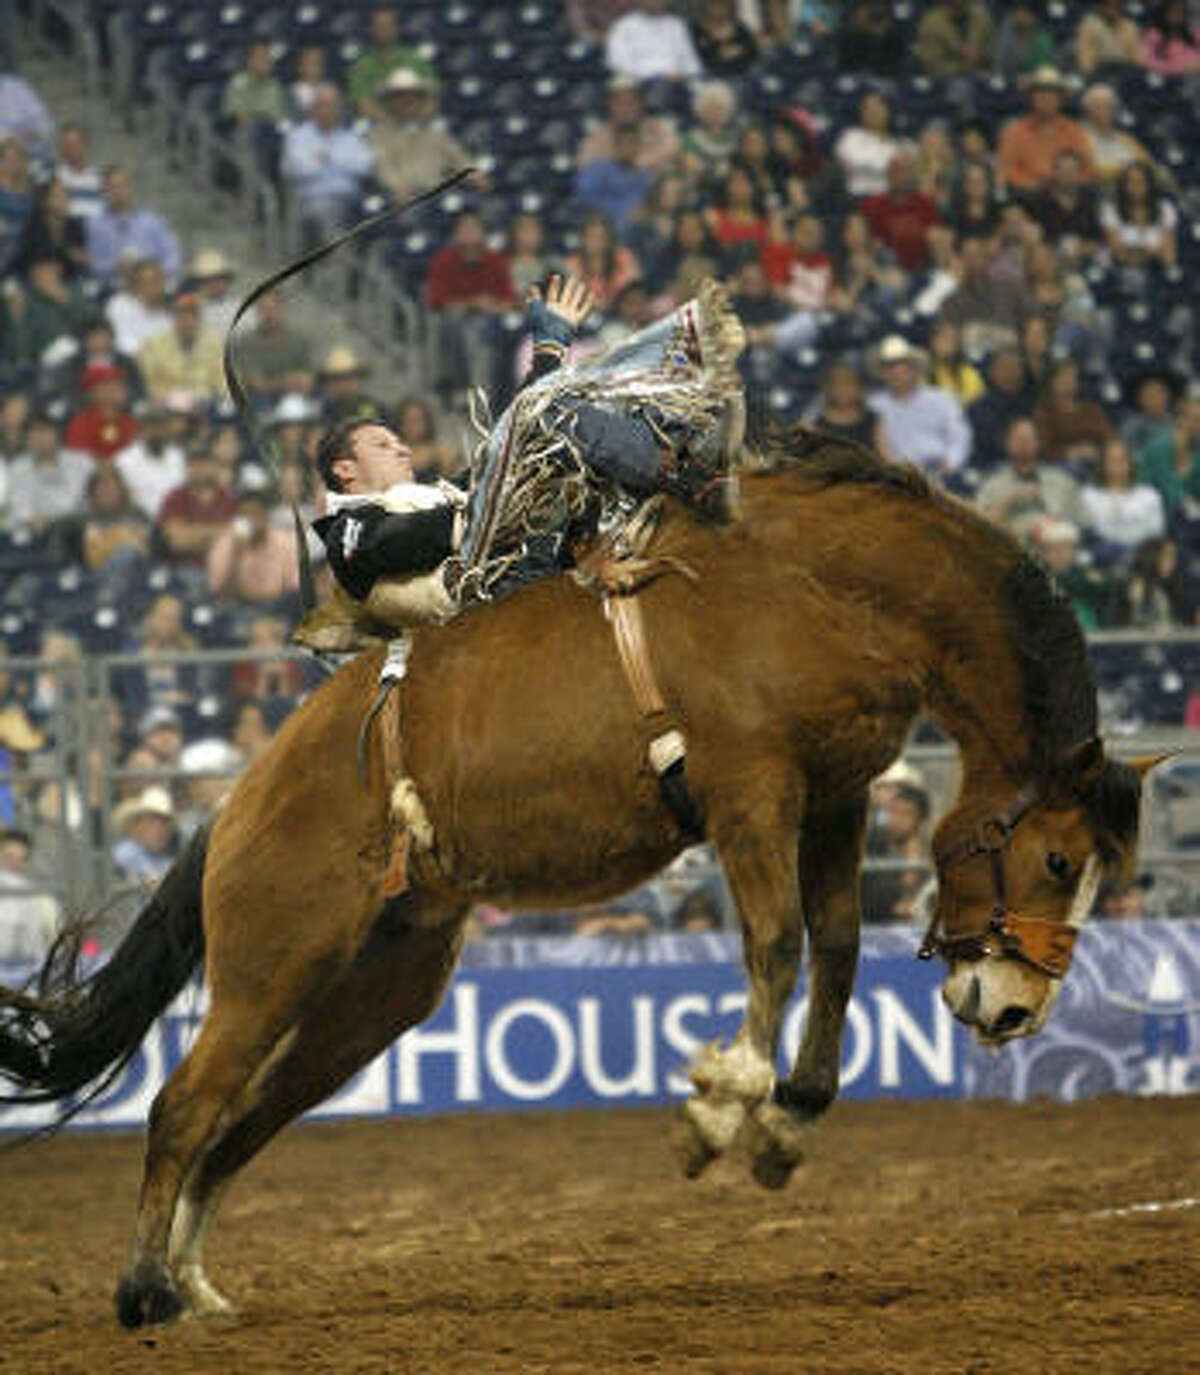 Clint Cannon rides Lonesome Blues for a score of 78.5 during the bareback competition Wednesday night.